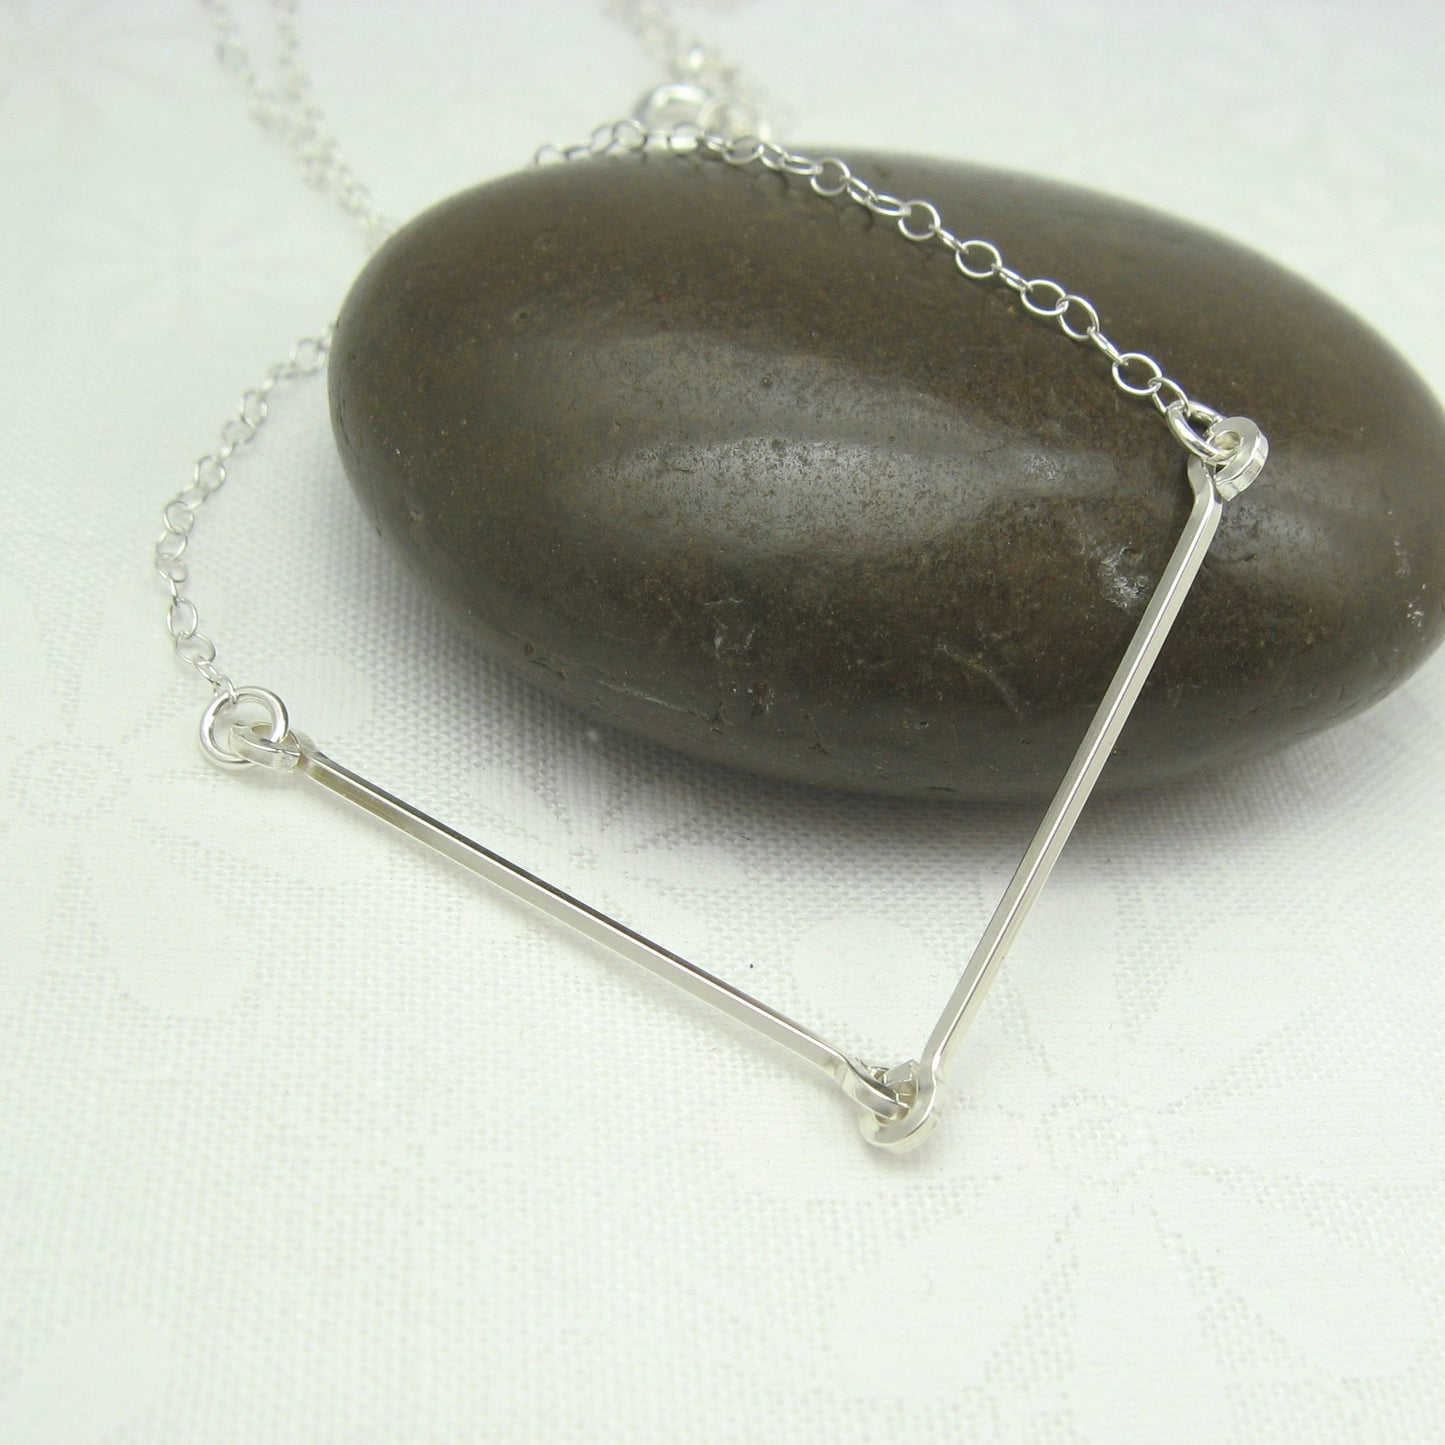 Linked Silver Necklace